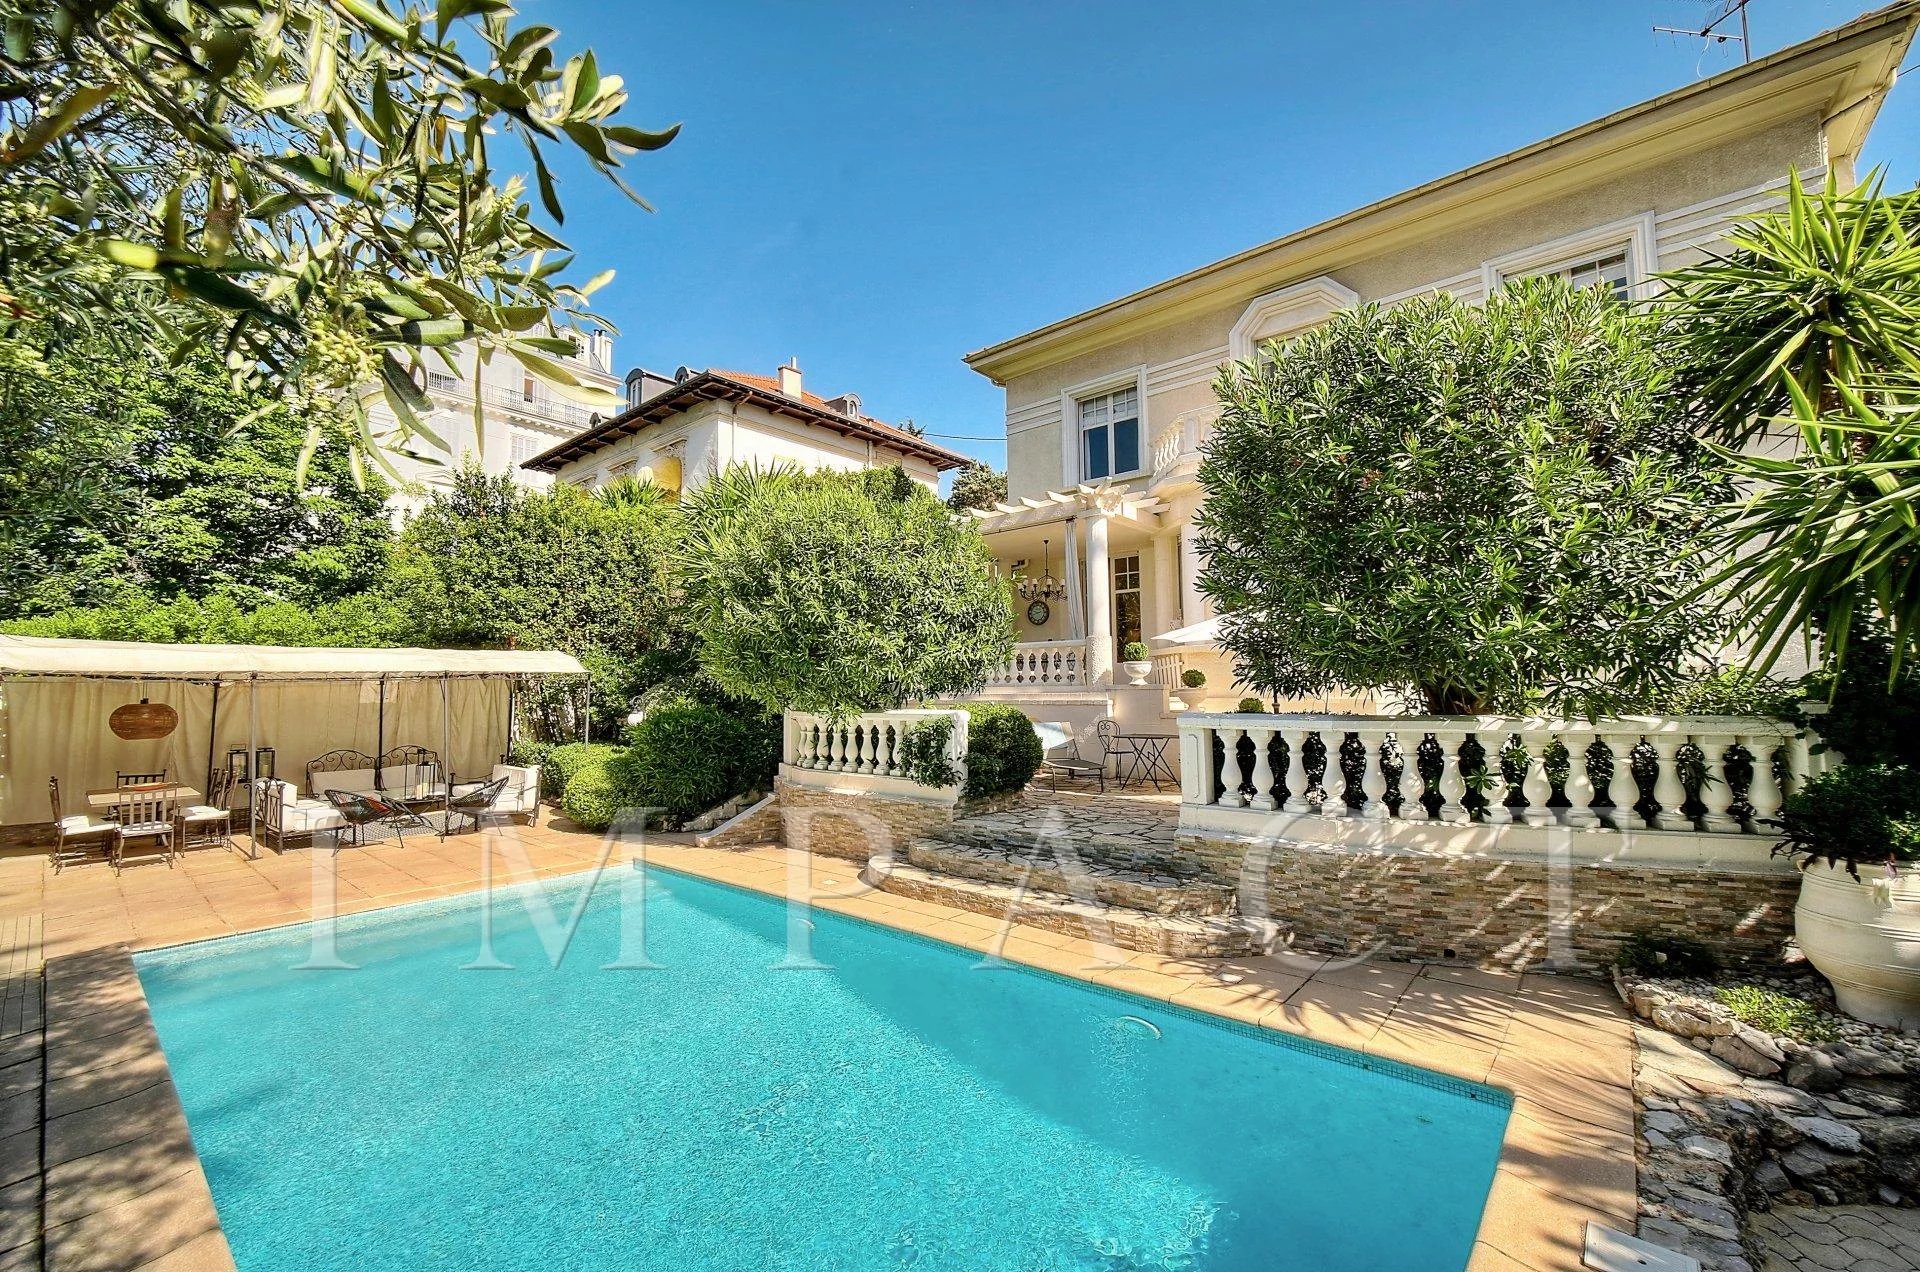 Nice villa to rent close to Cannes center